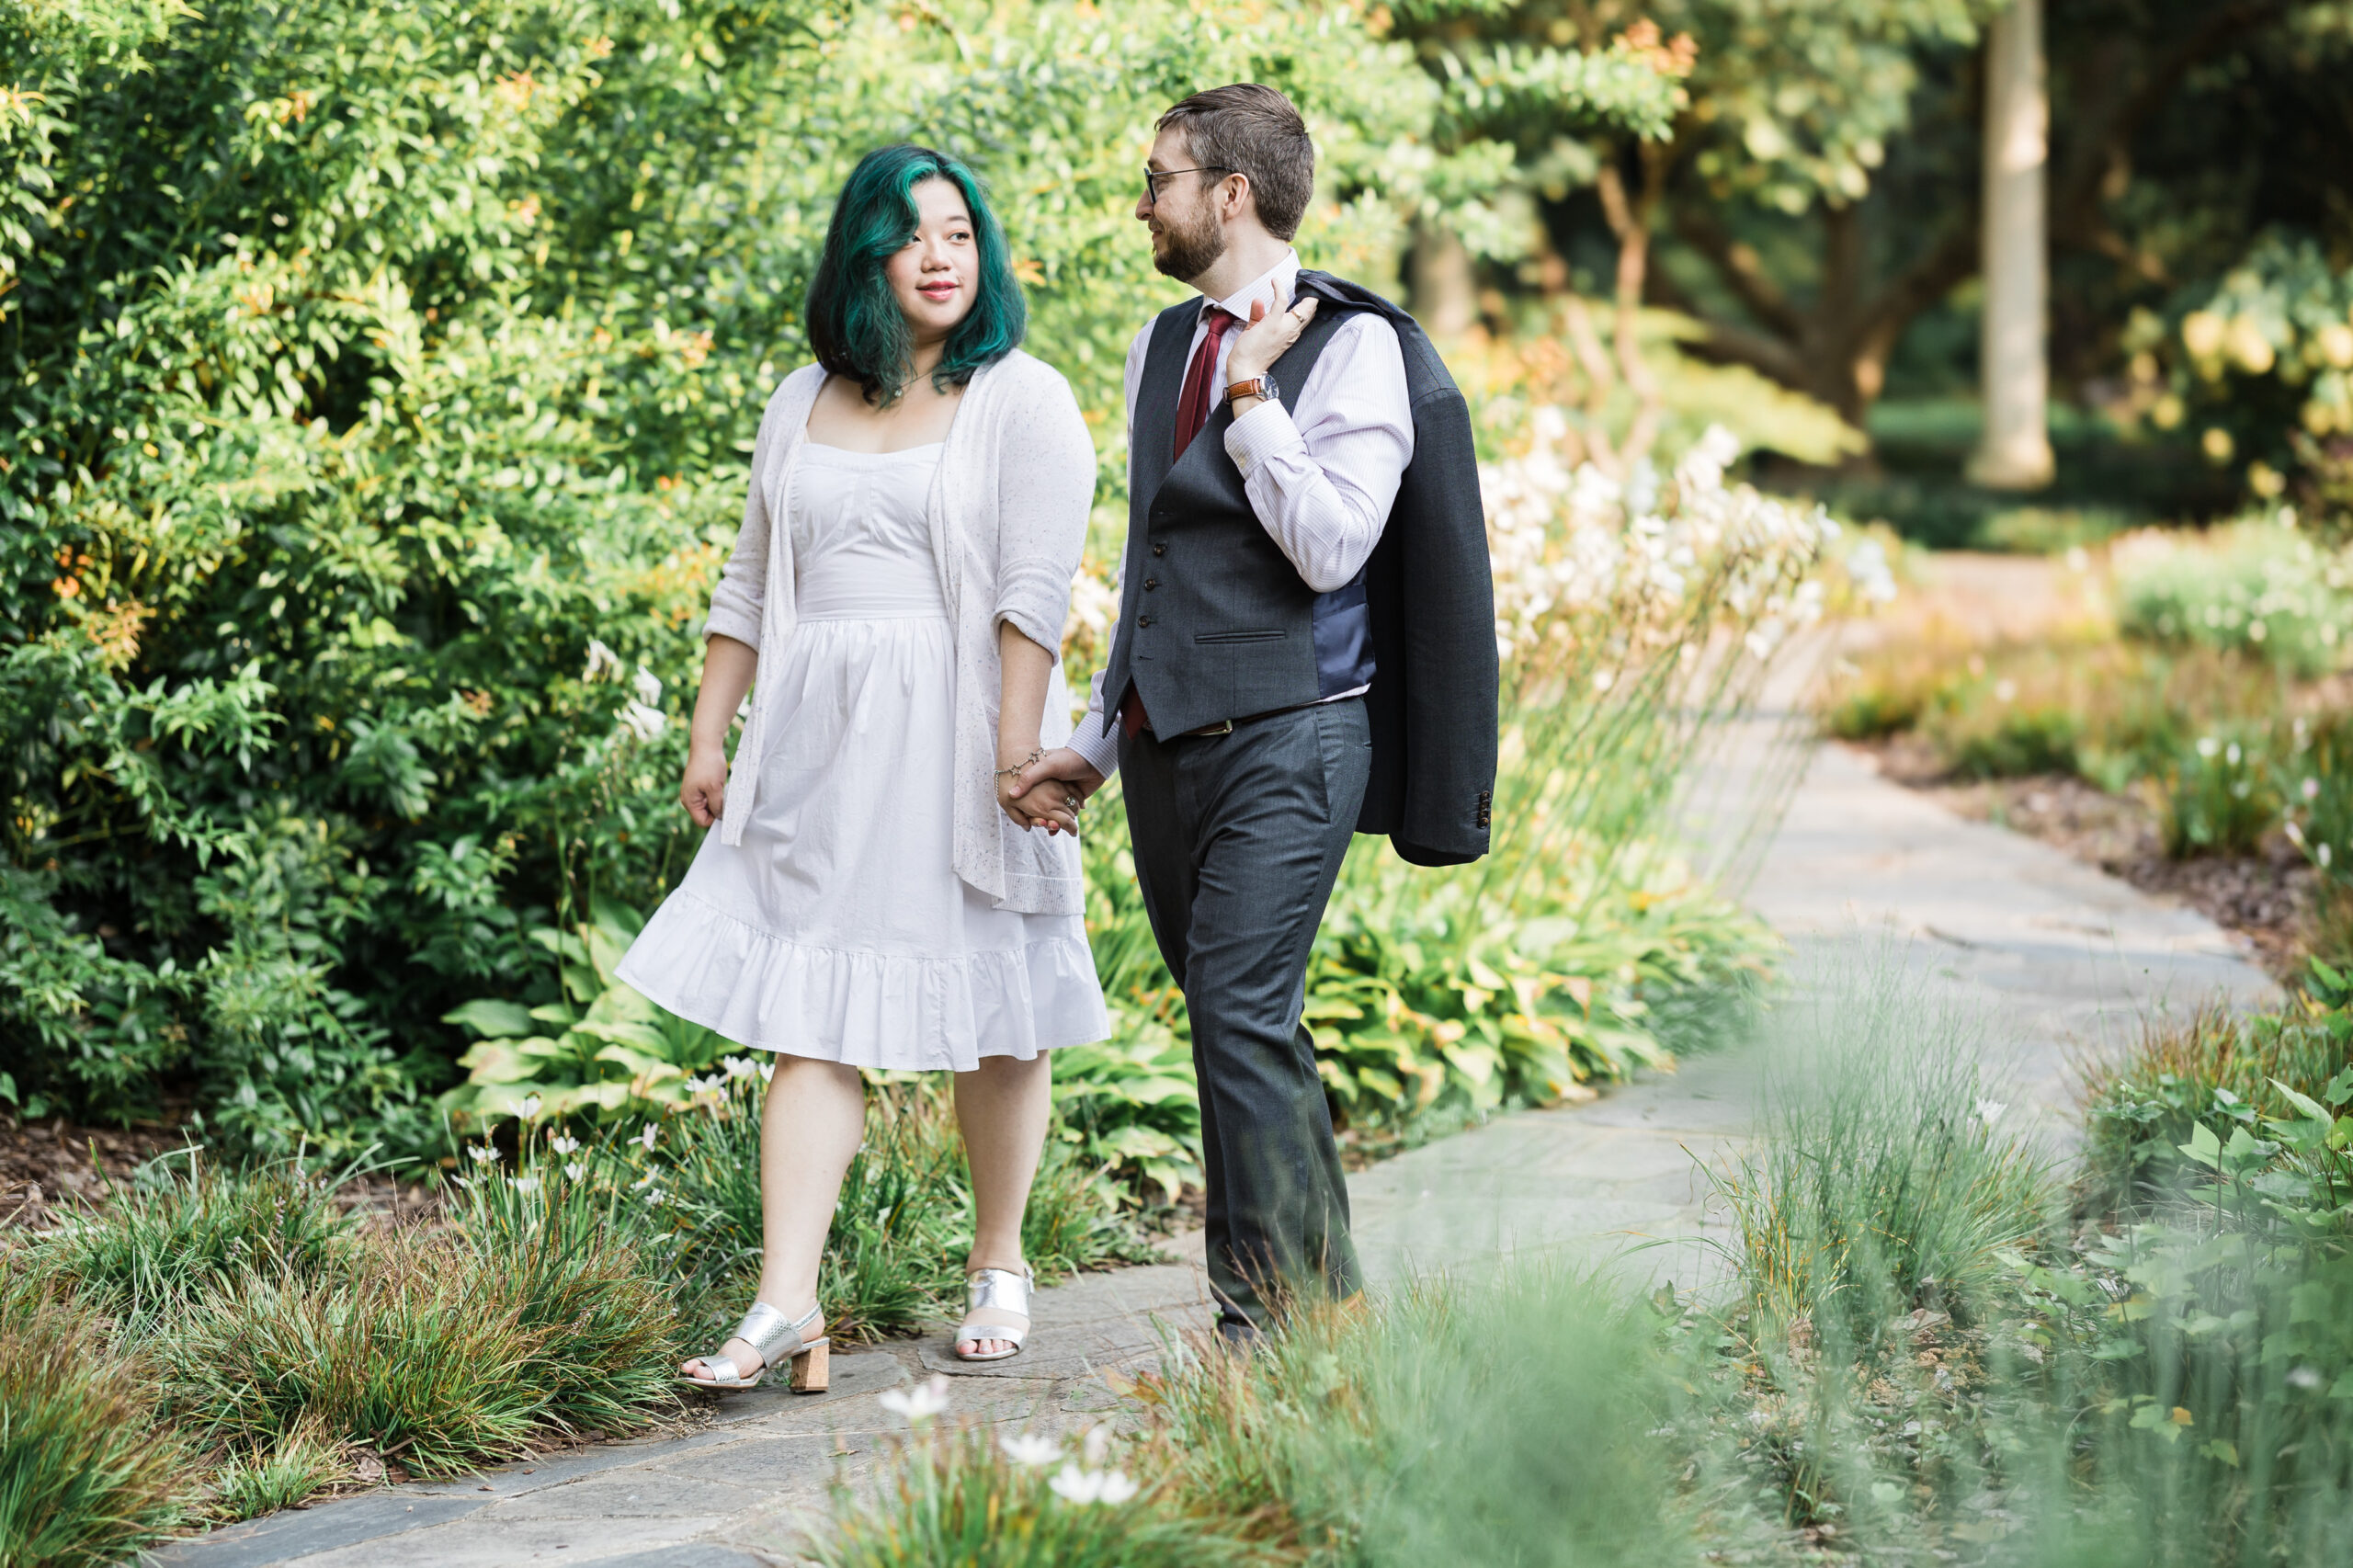 Bride and Groom walking hand in hand at a garden while look at each other